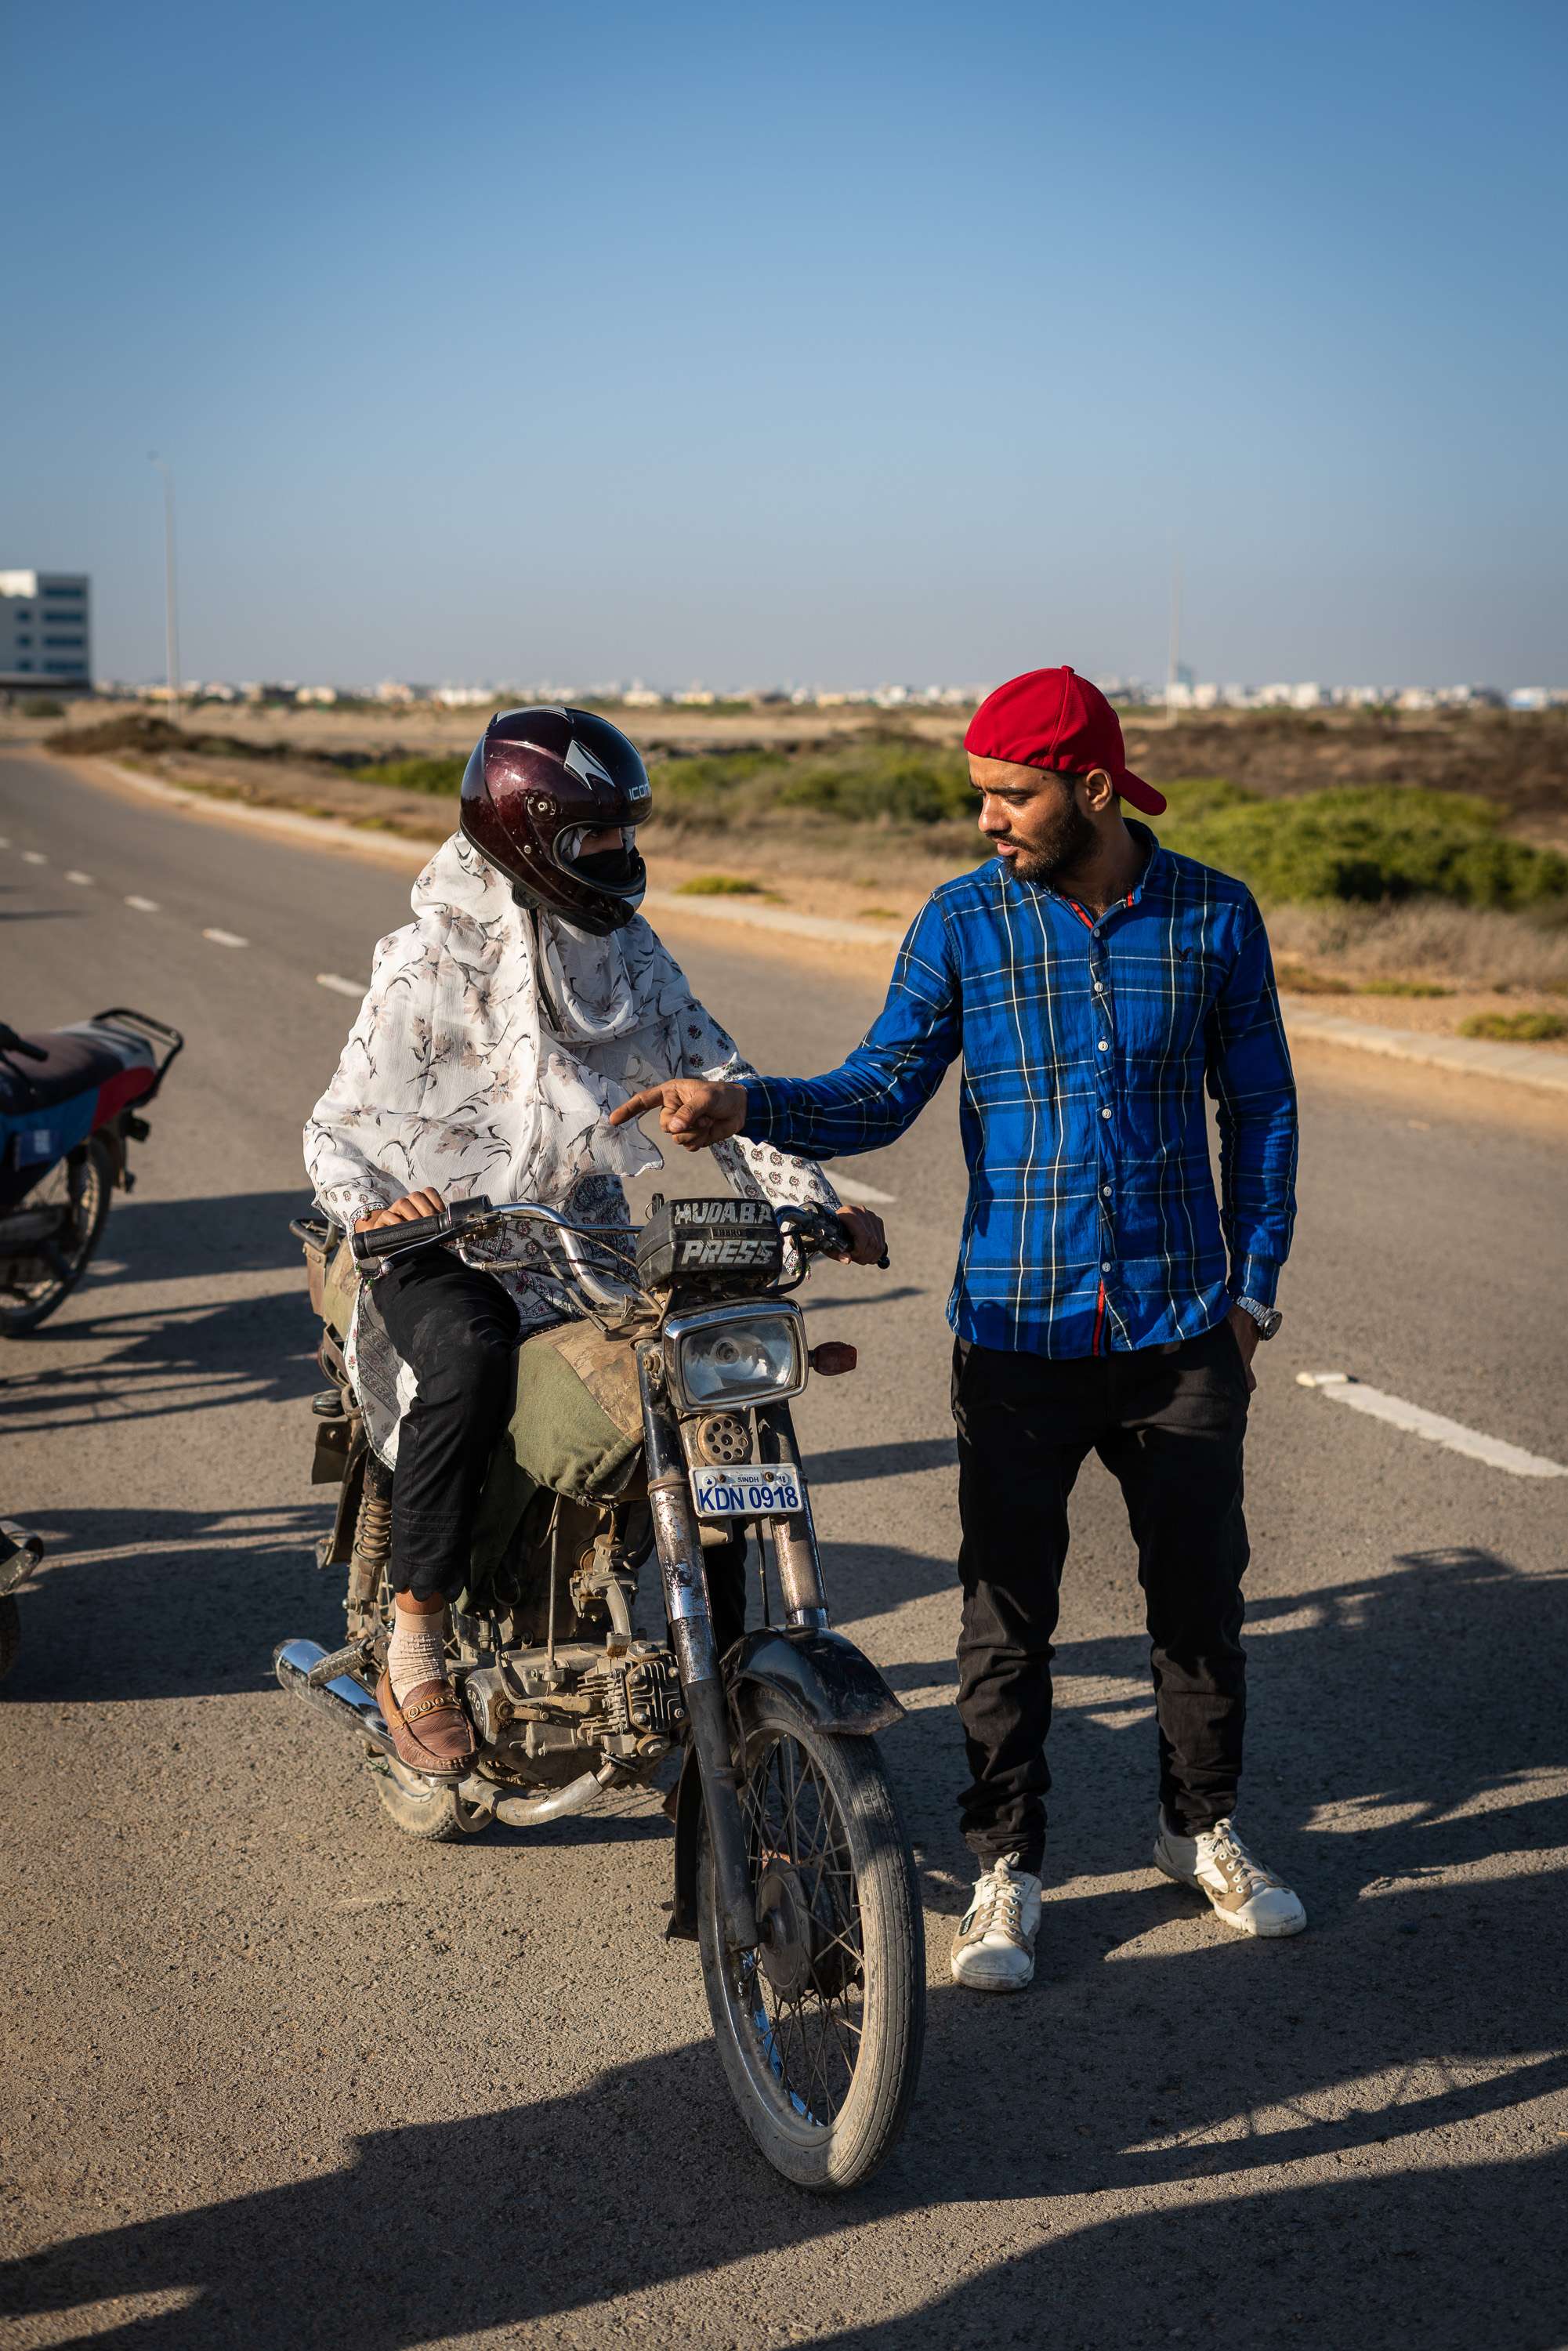 Sairah Abbasi receives guidance from a Pink Riders instructor during her fourth driving lesson in Karachi, Pakistan (photo: Philipp Breu)